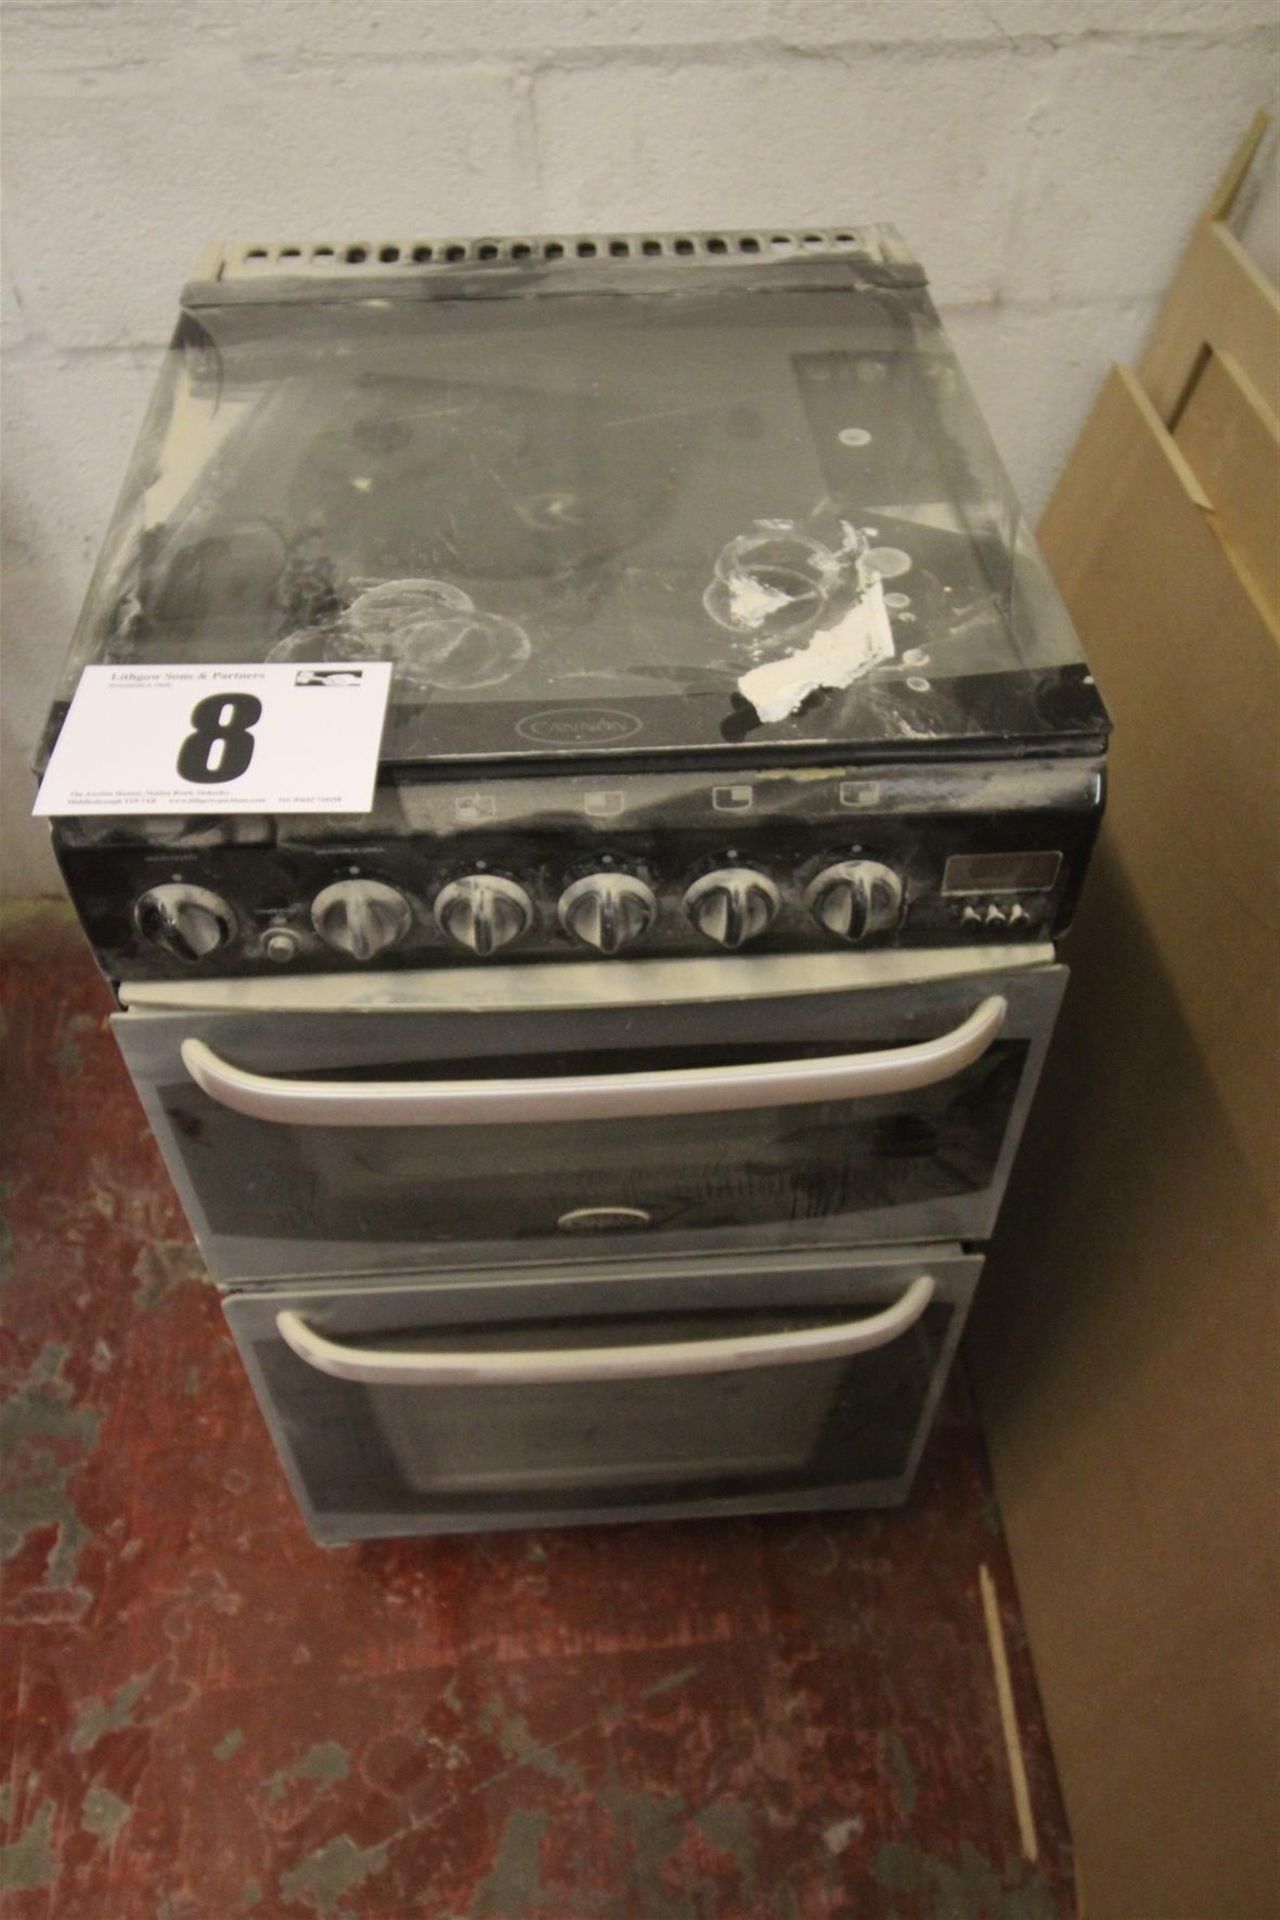 CANON 4-RING GAS OVEN WITH DOUBLE DOORED OVEN UNDER